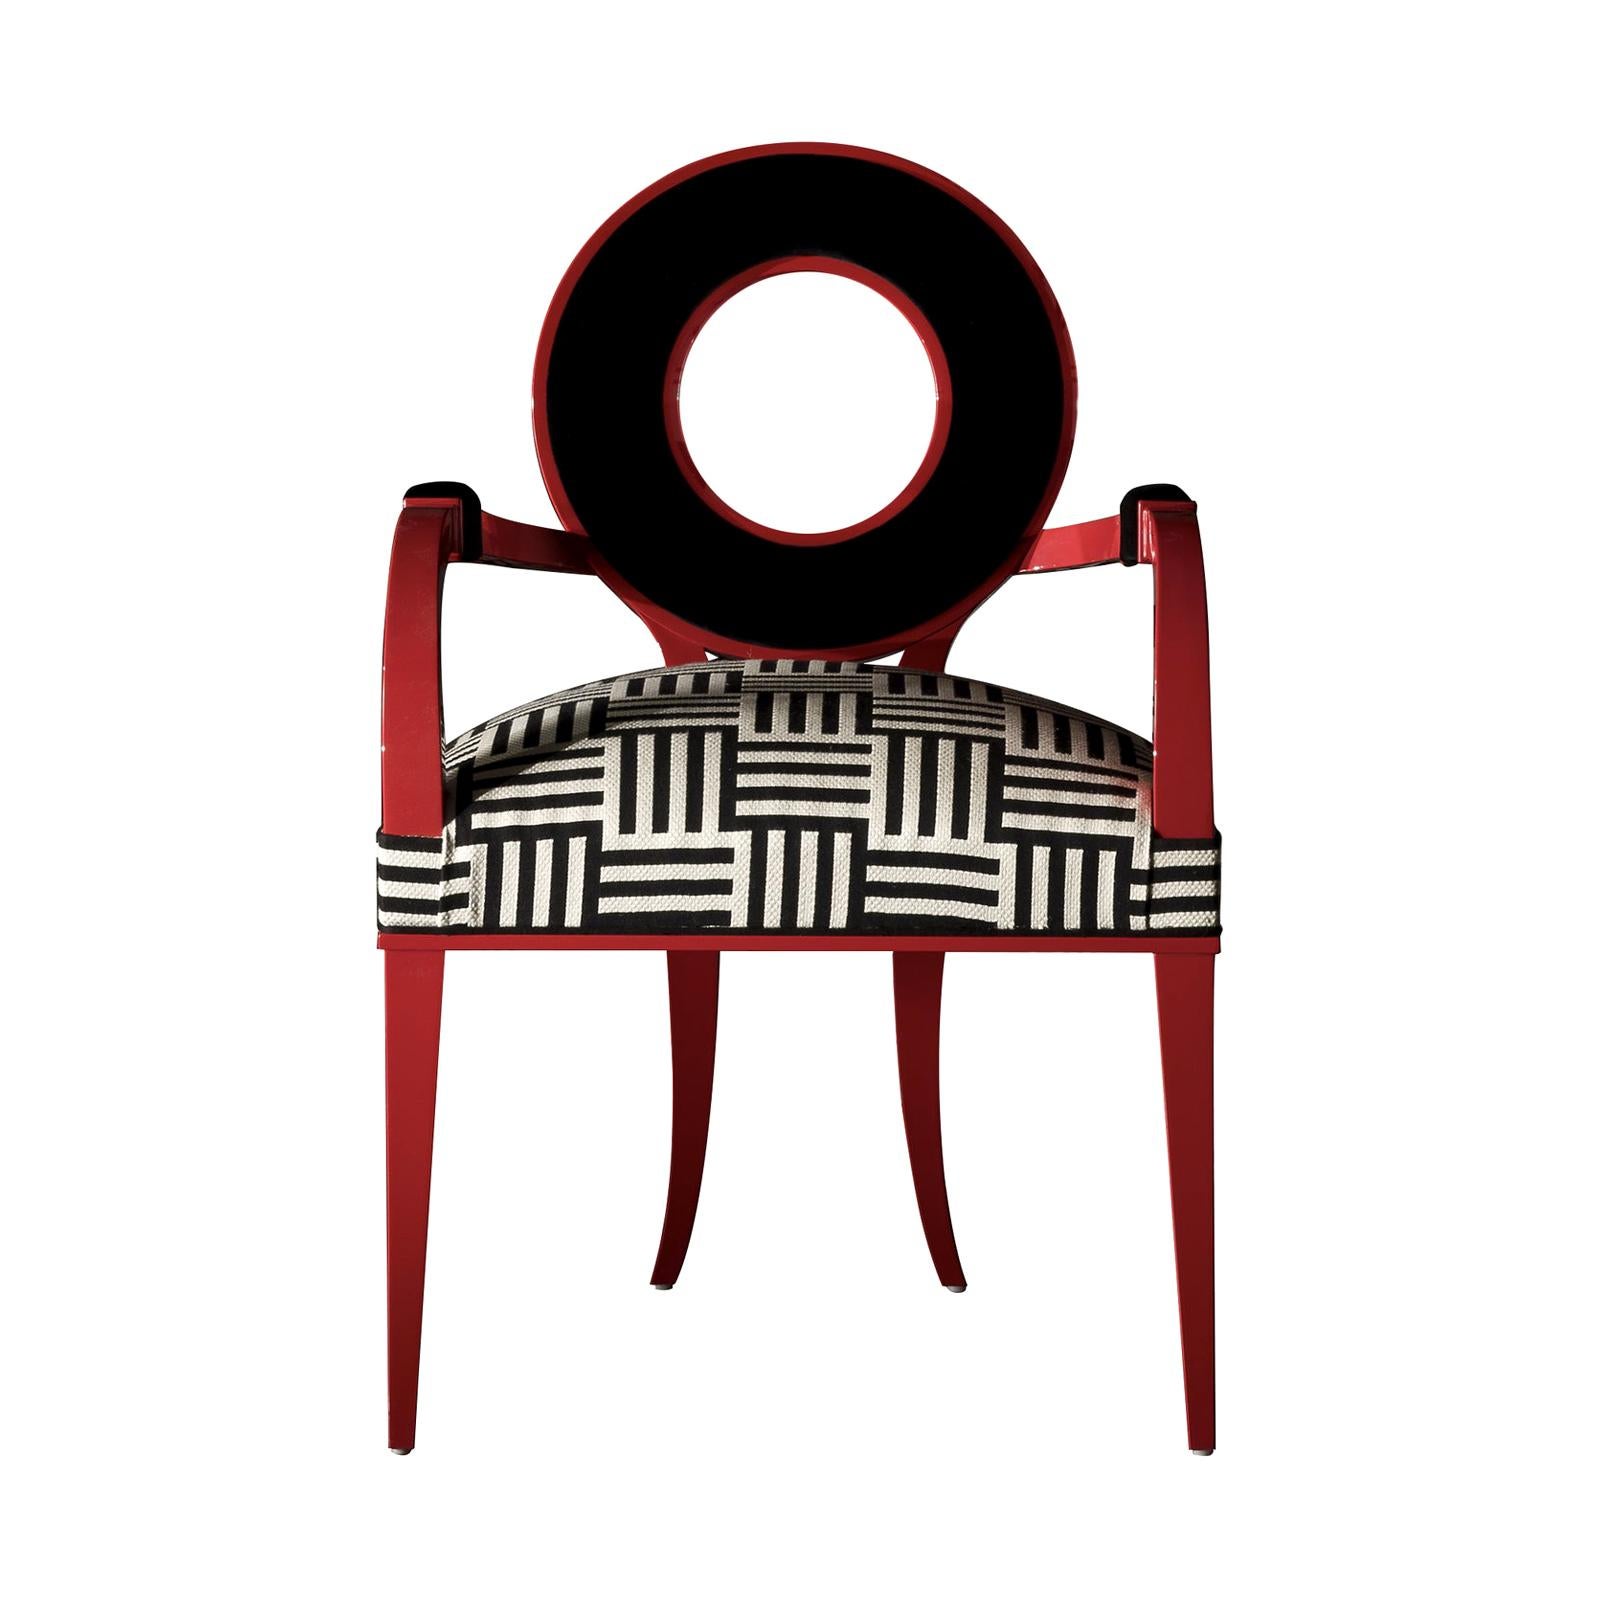 New Moon Red Chair For Sale